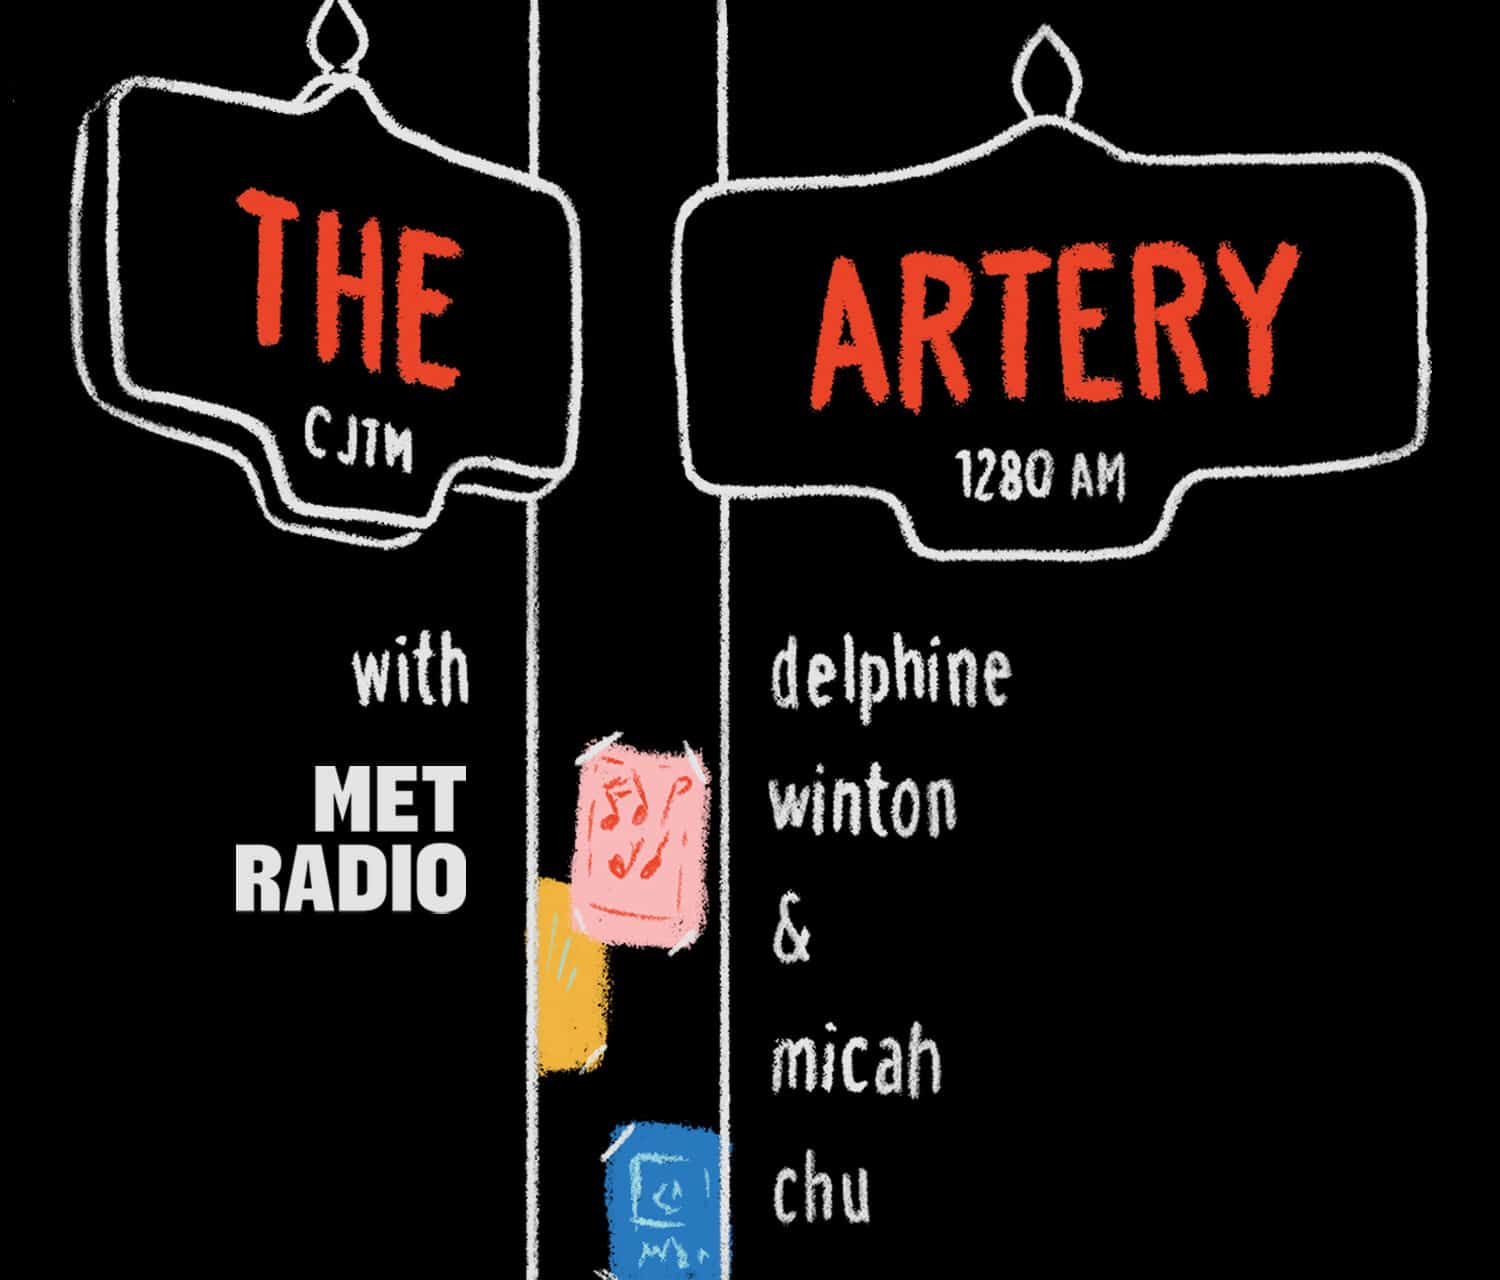 An illustrated image of a sign post with two street signs on it - one reads "The" and the other "Artery". Below the signs, it reads "with Met Radio, by Delphine Winton and Micah Chu".